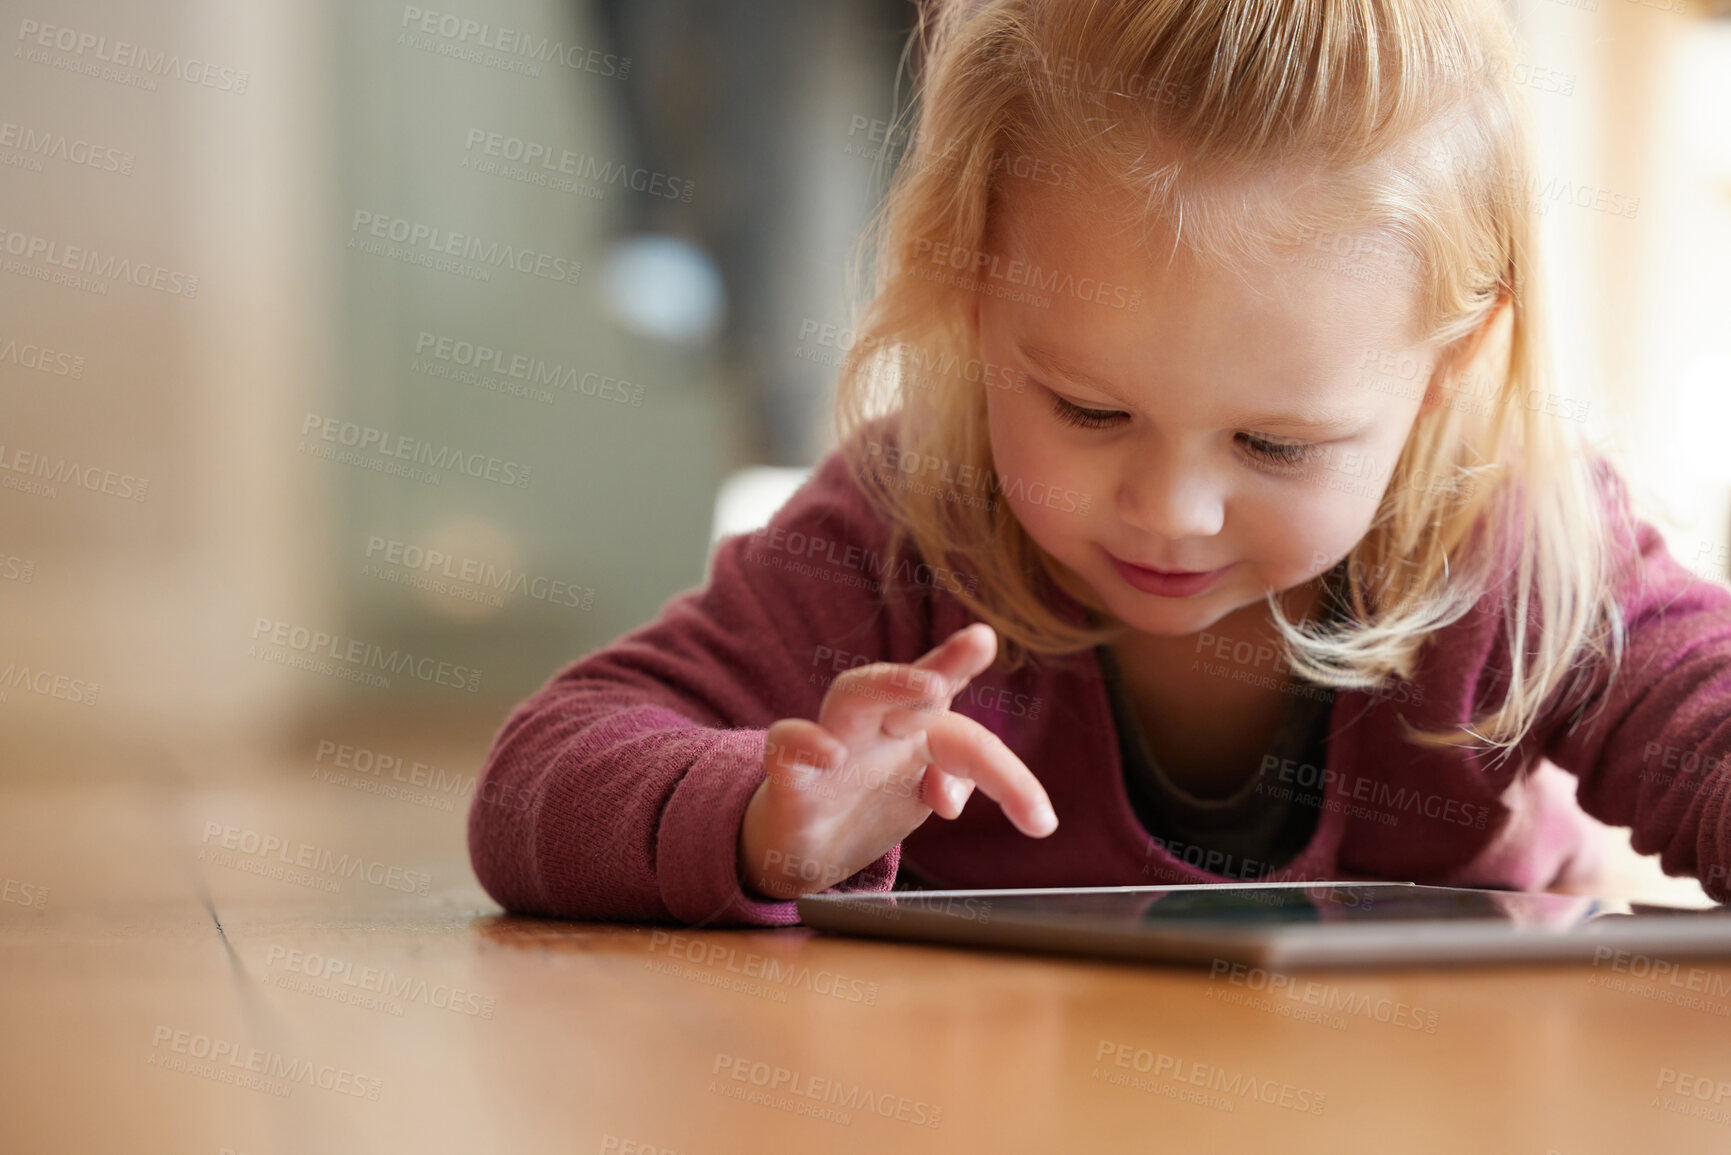 Buy stock photo Shot of an adorable little girl wearing headphones whiles using a digital tablet